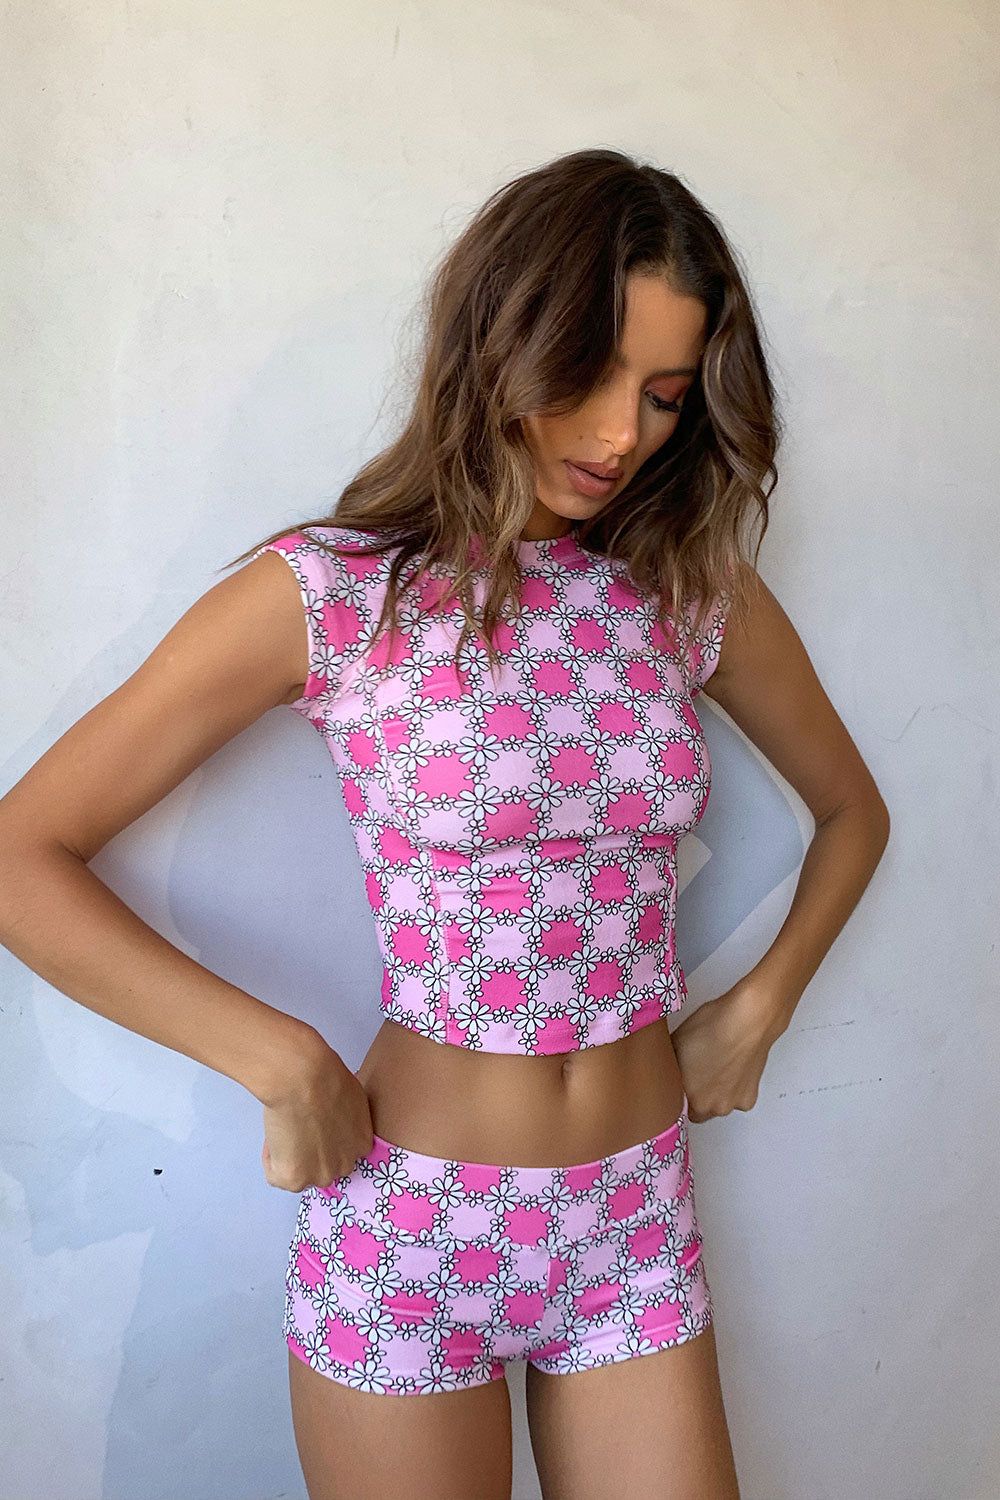 Blue Crush Terry Floral Crop Top - Pink Daisy